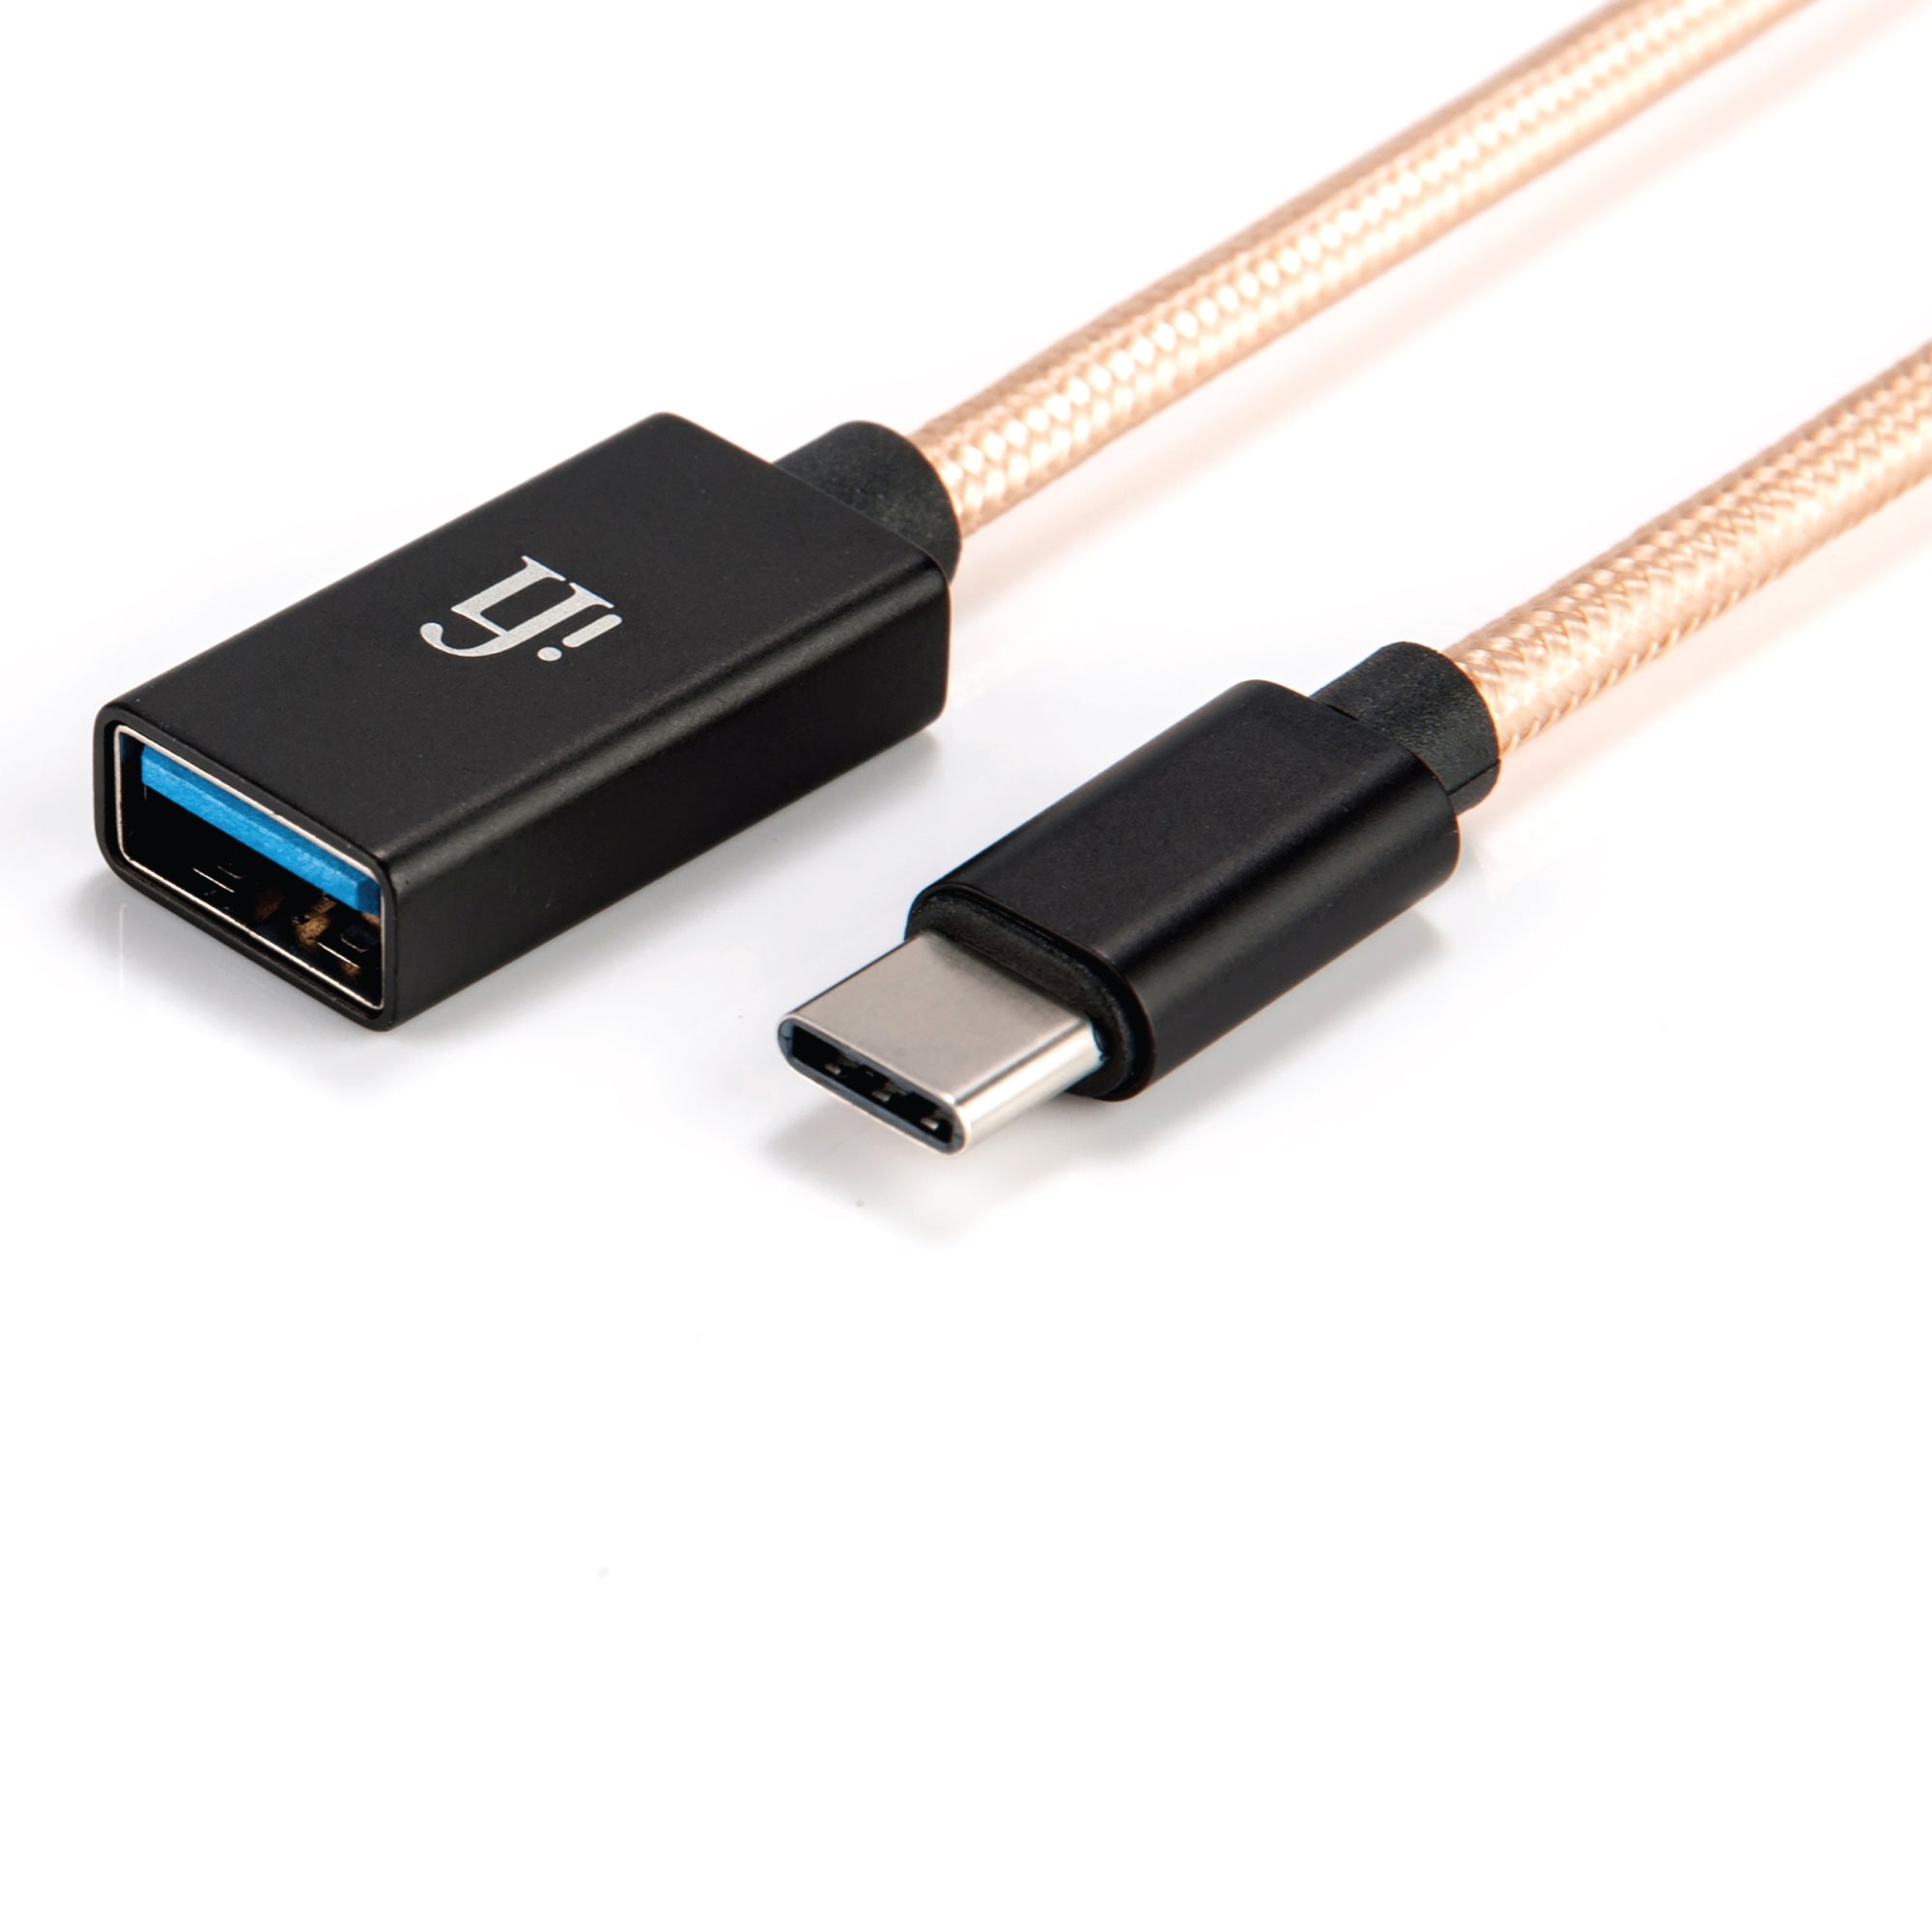 iFi Audio USB 3.0 Type-C to USB Type-A OTG Cable - Gears For Ears